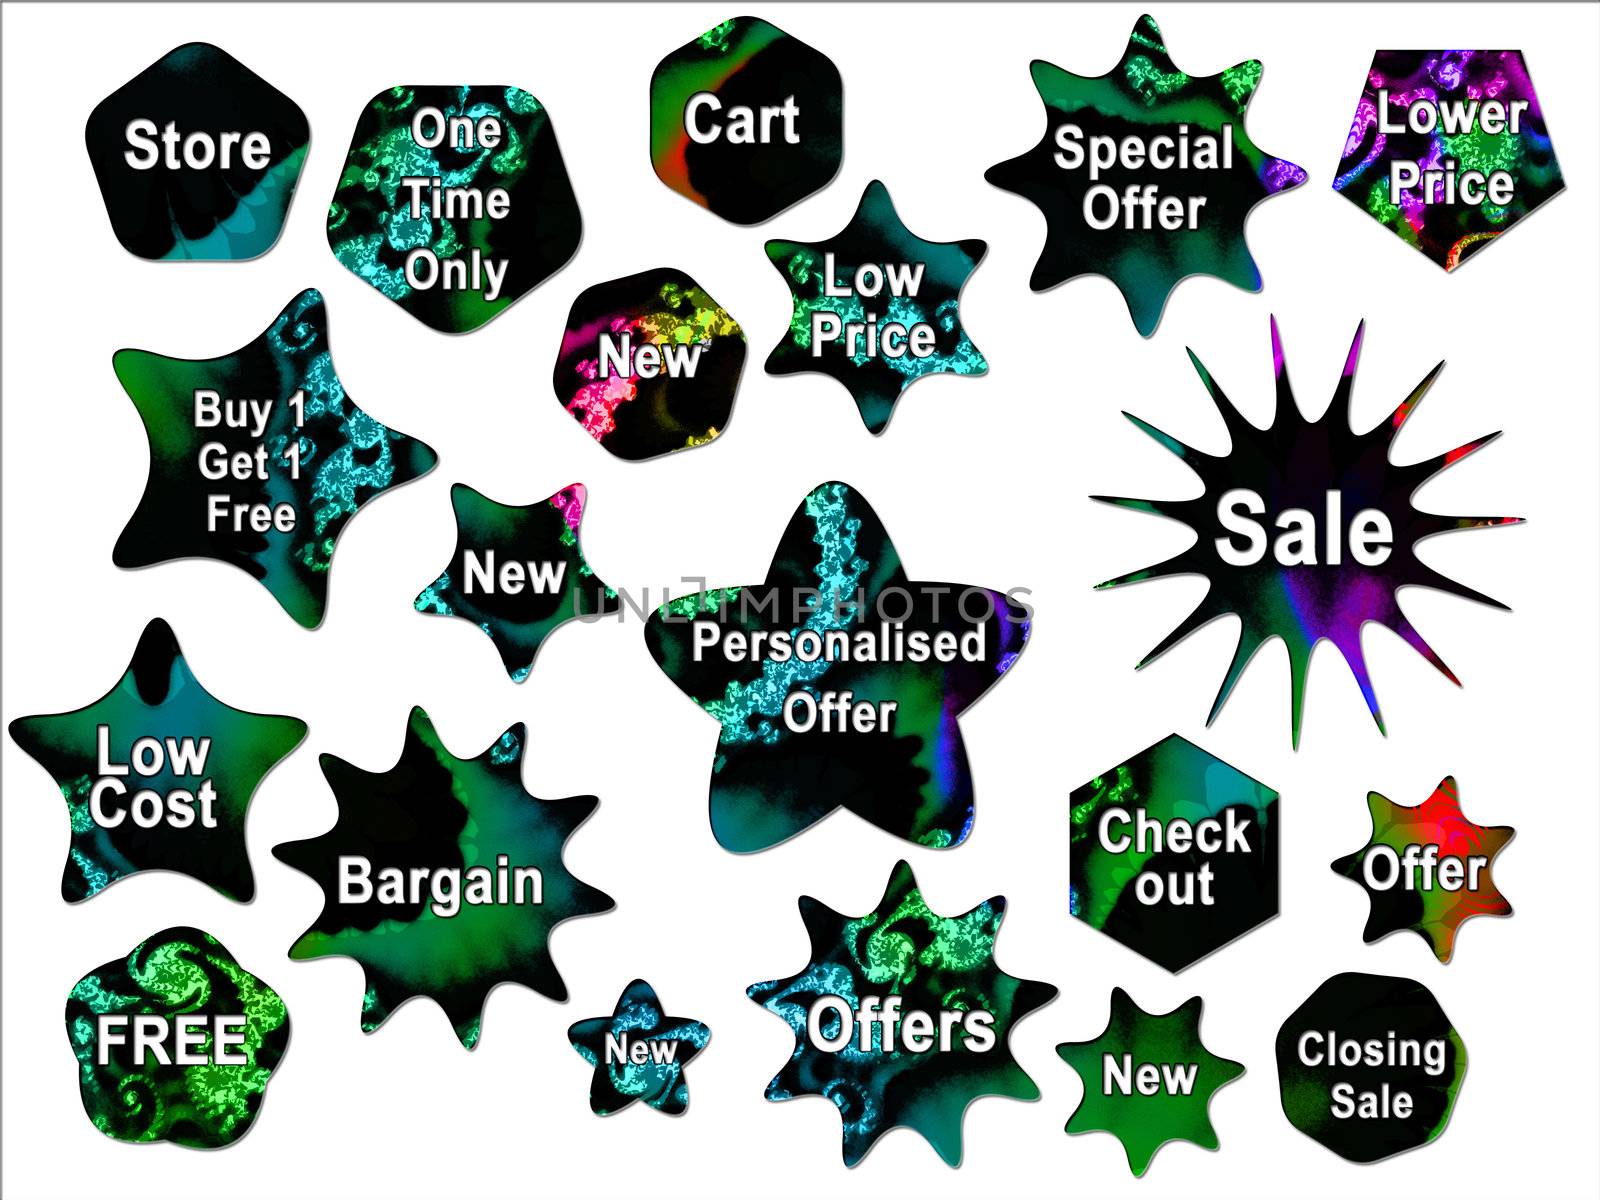 Bright 70s Psychodelic Hippy For Sale Special Price Button Shapes